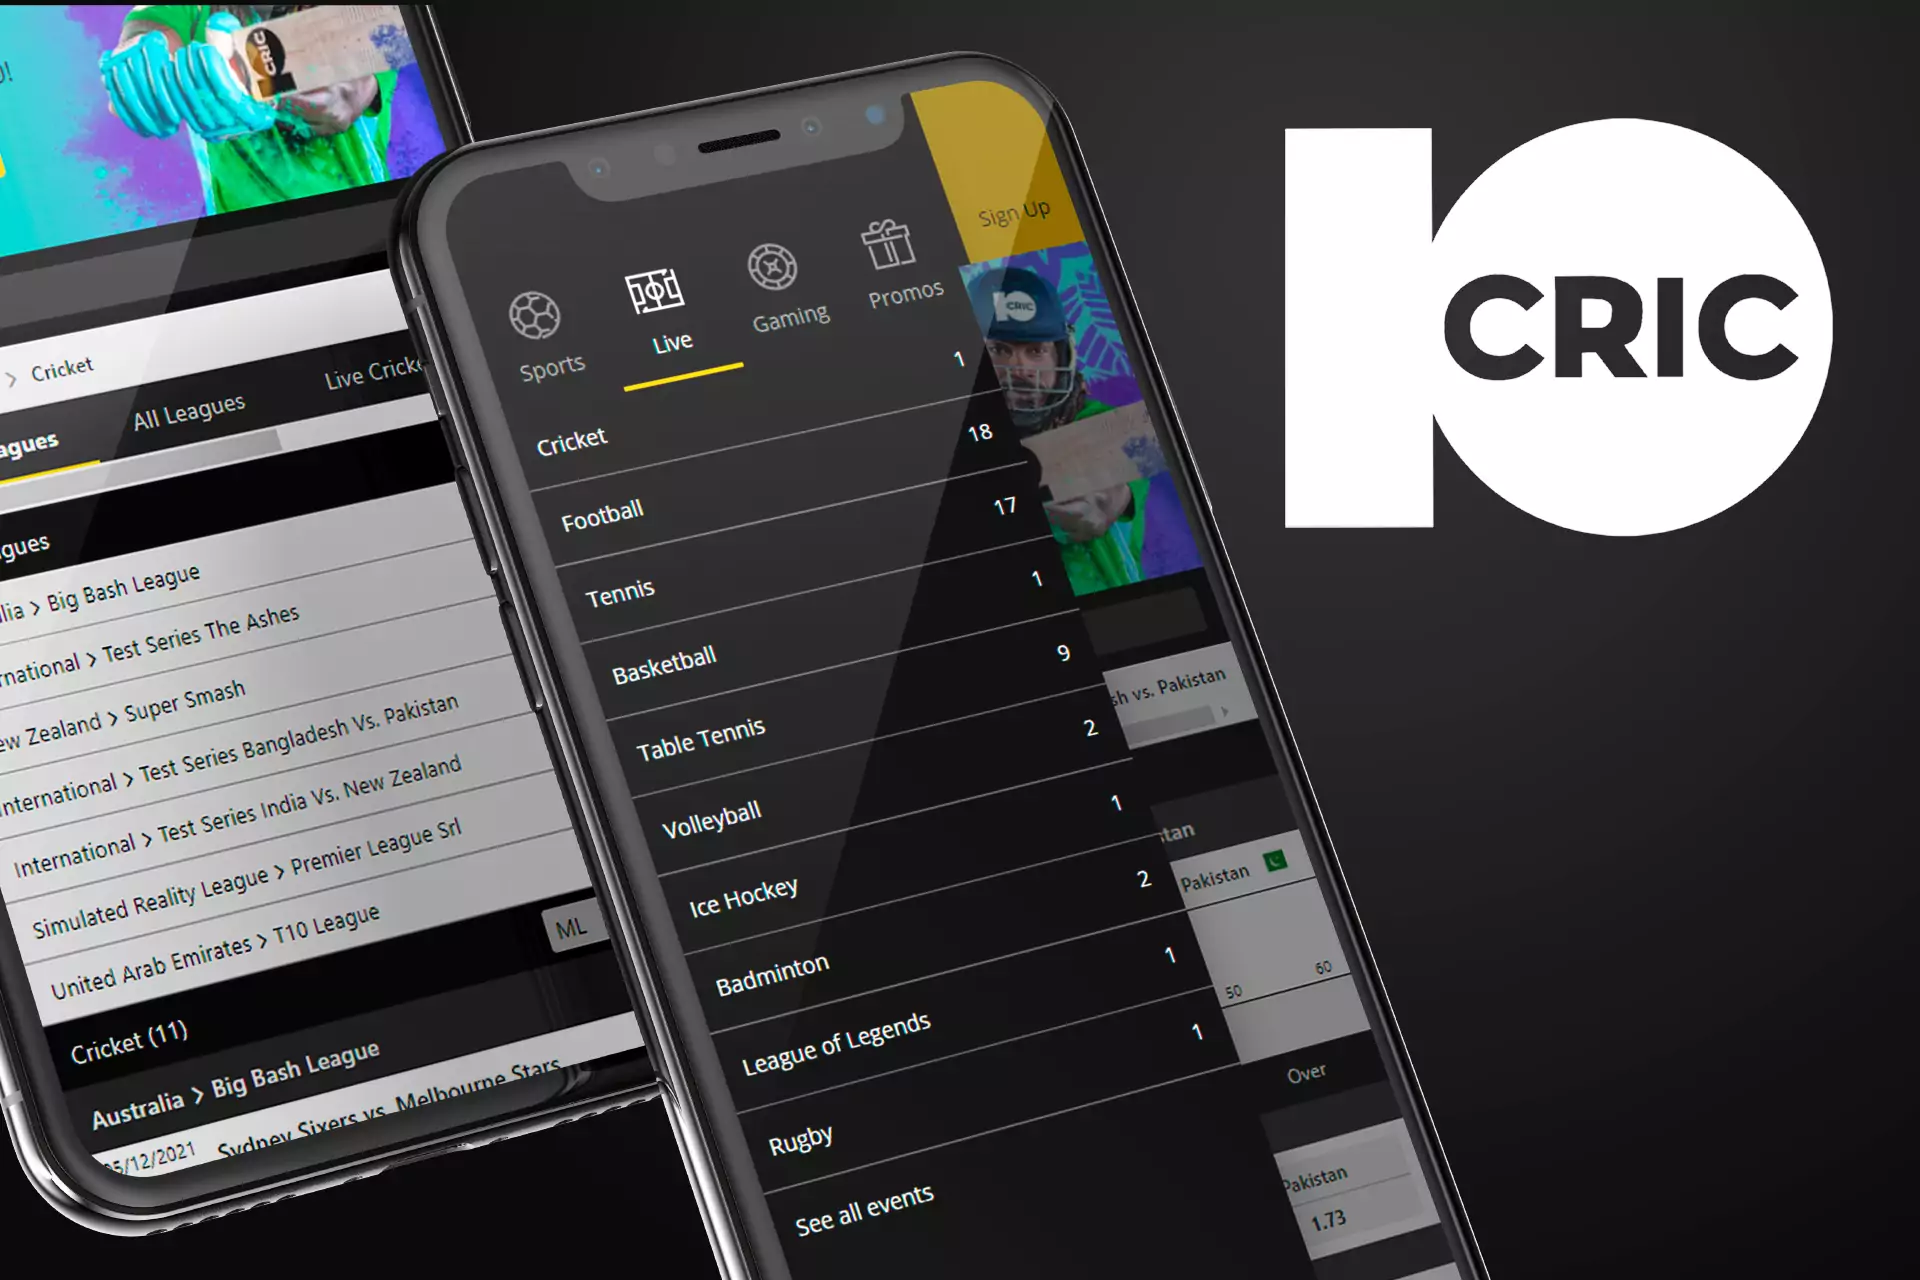 The 10Cric app offers a variety of options for sports betting and online casino games.